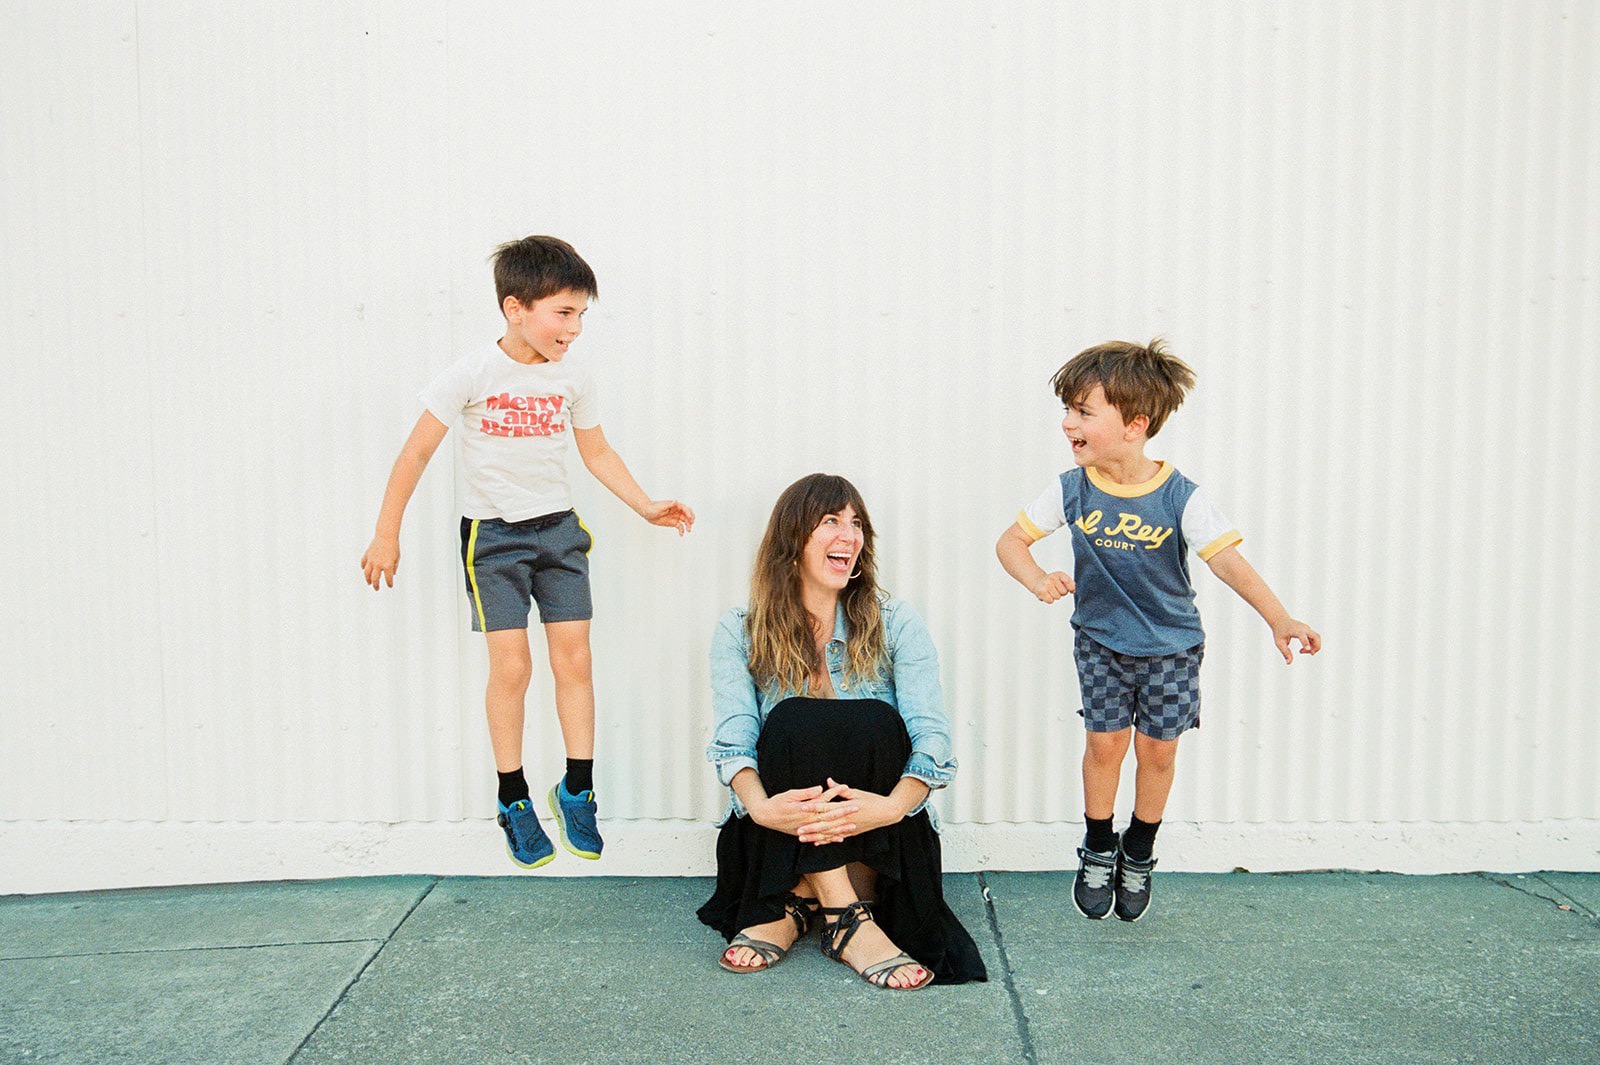 Laura Jaeger, a San Francisco family photographer and her two sons posing for a photo